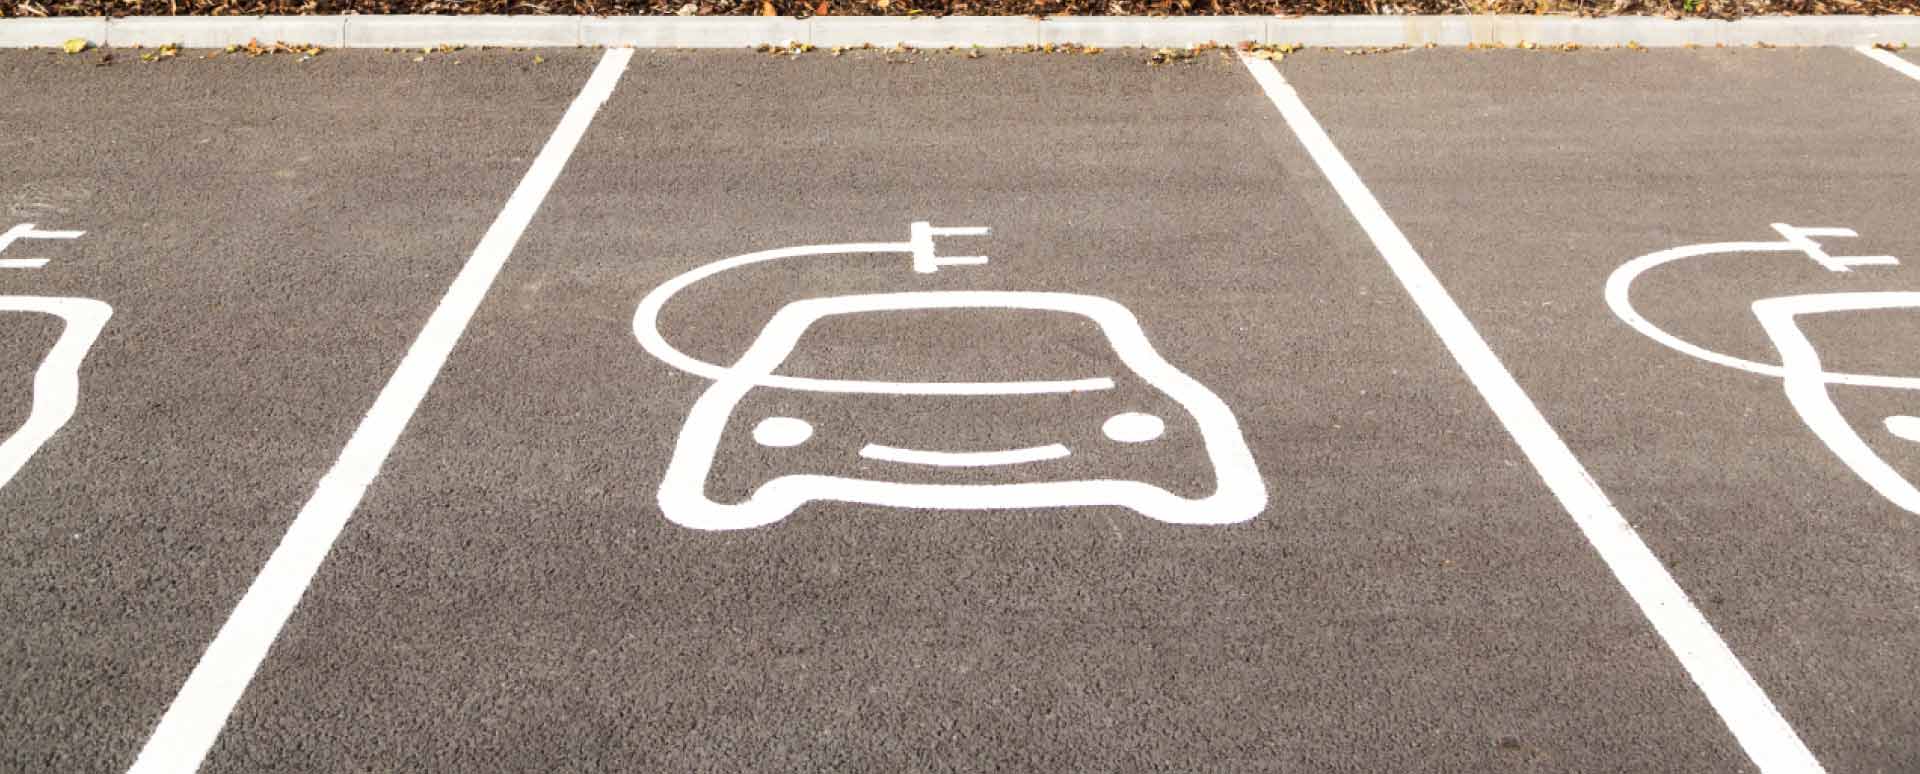 Electric Vehicle Symbol In Parking Space